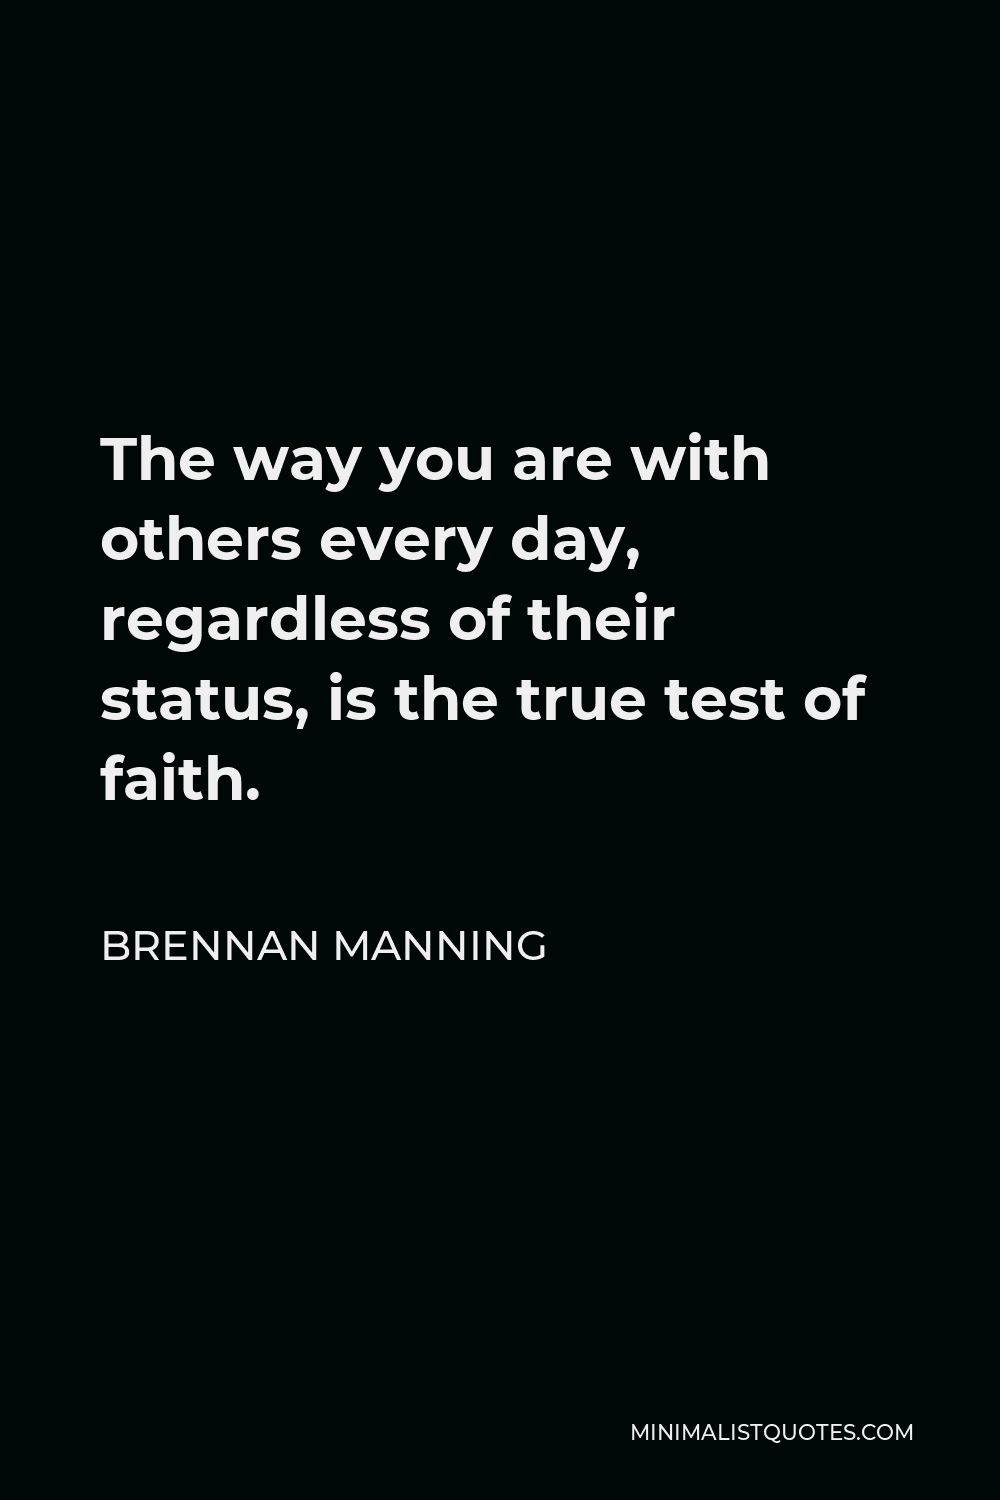 Brennan Manning Quote - The way you are with others every day, regardless of their status, is the true test of faith.